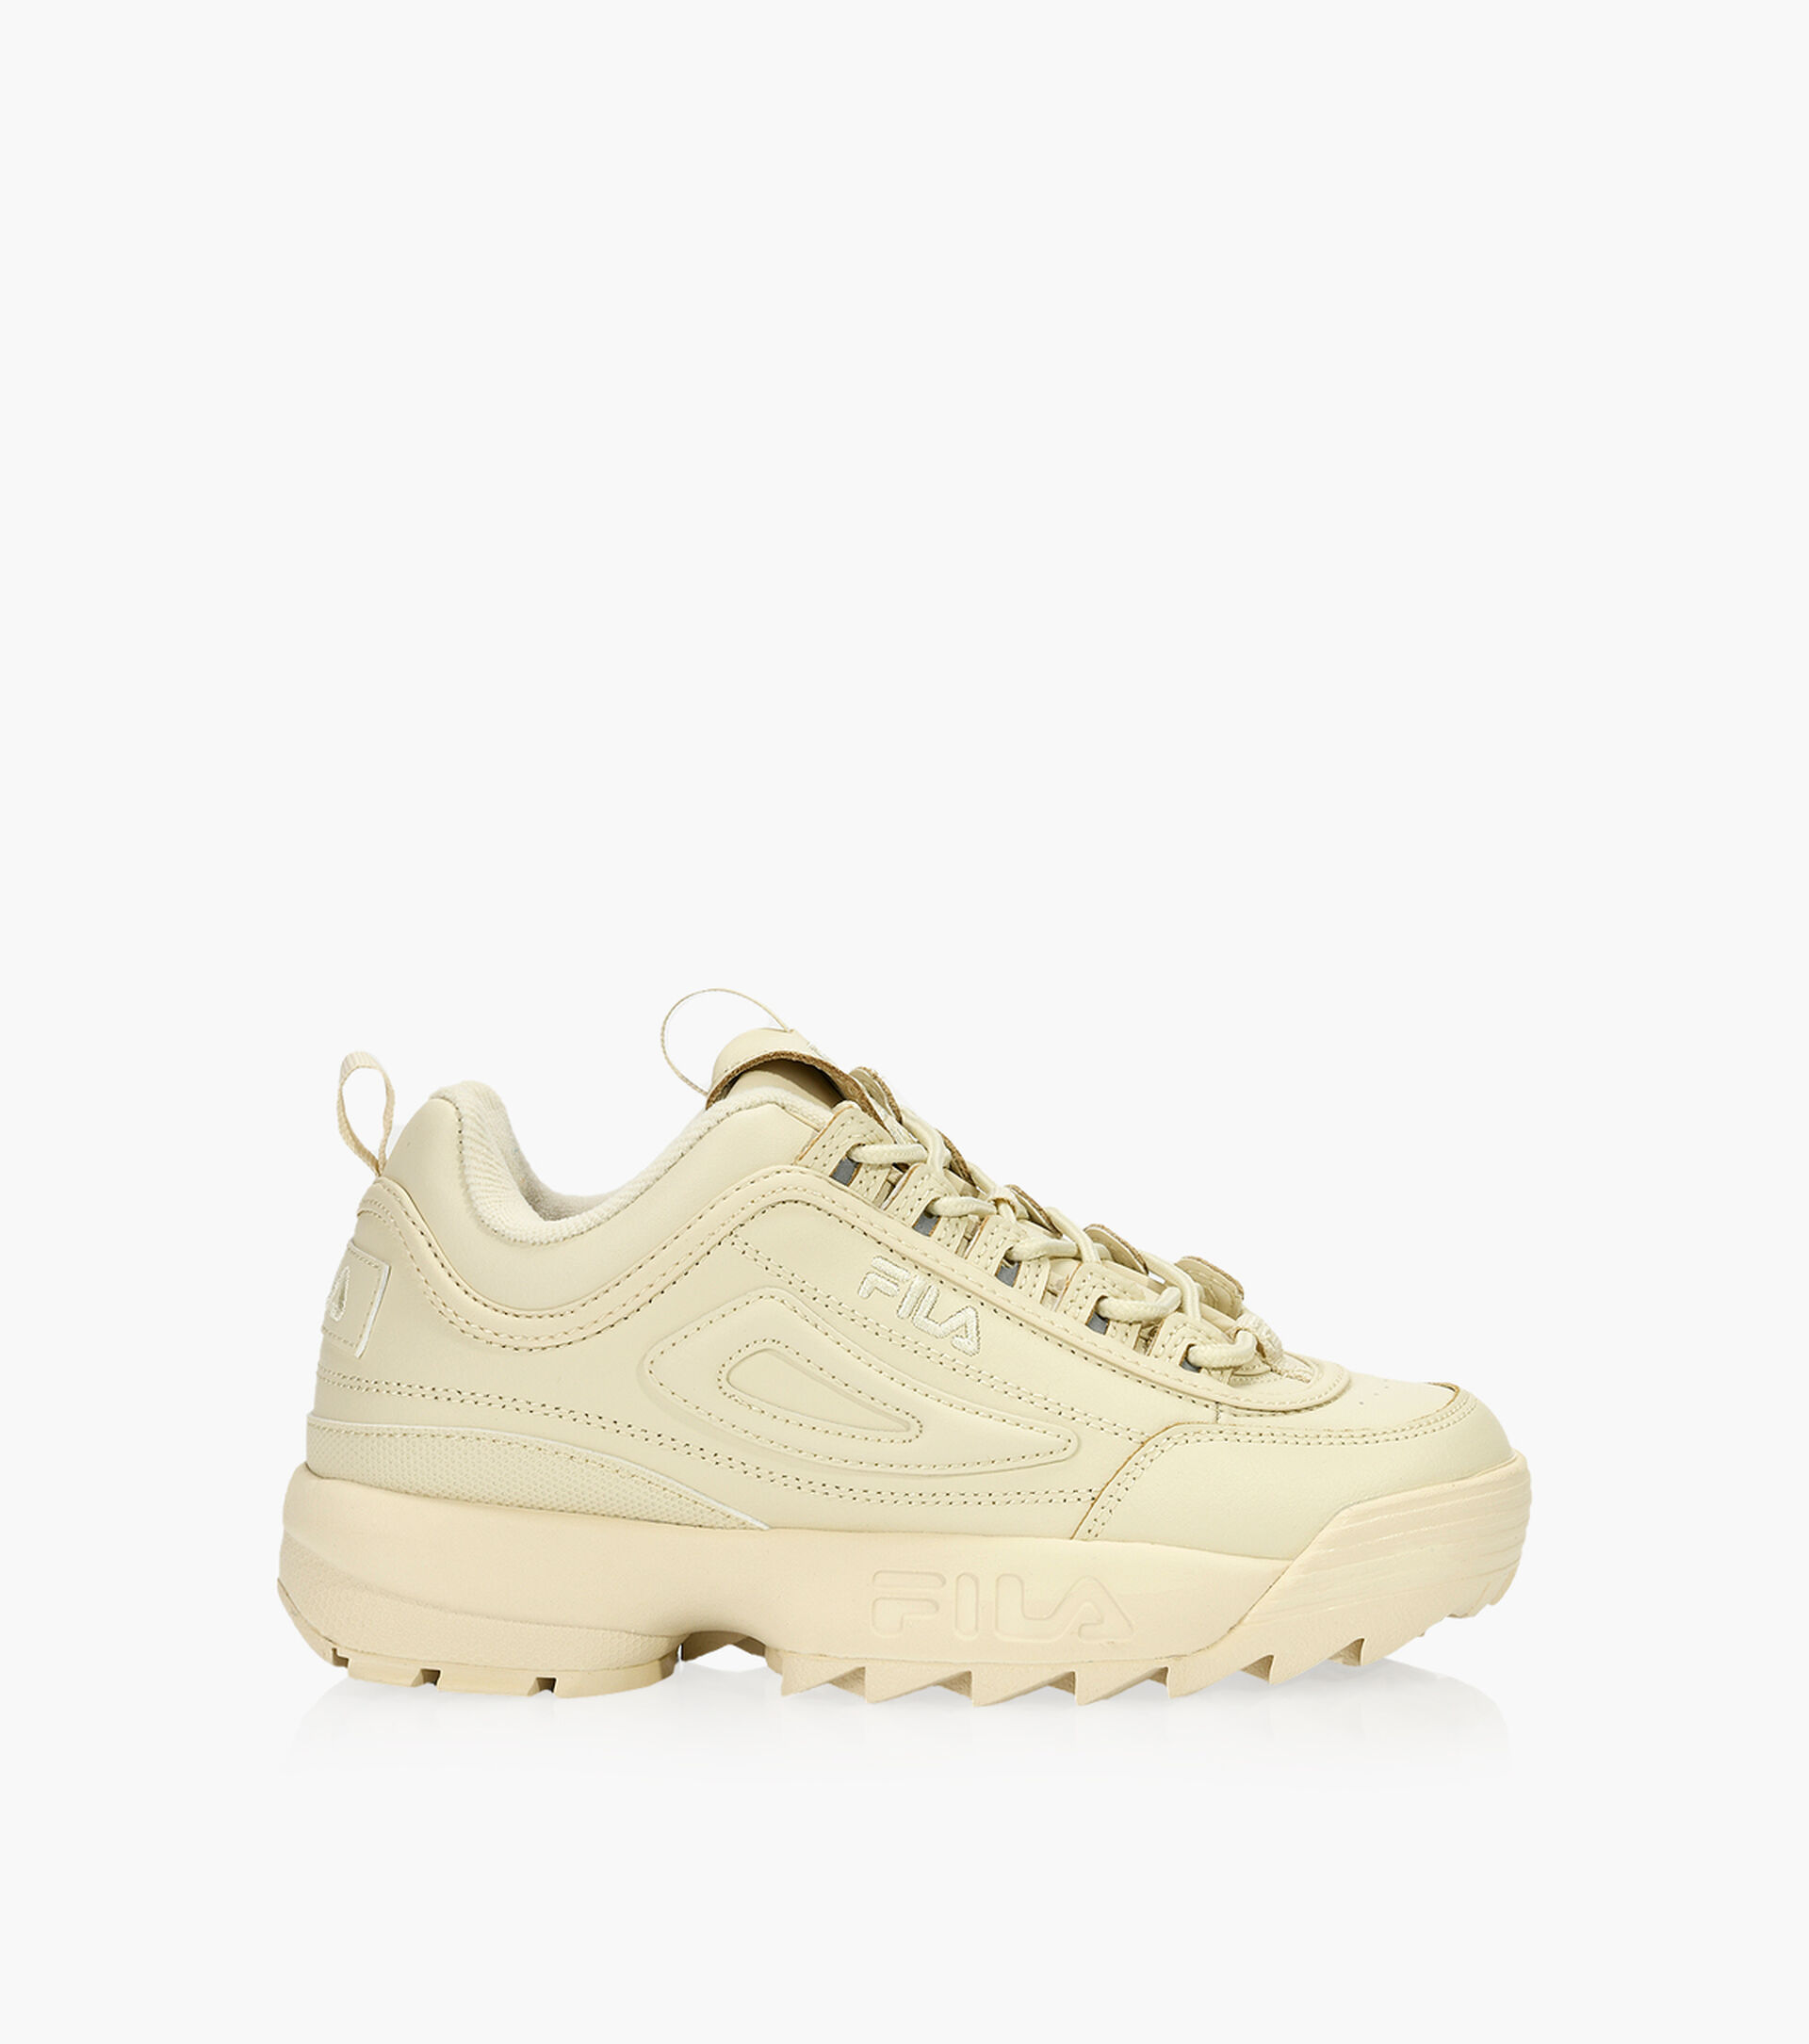 FILA DISRUPTOR 2 PREMIUM - Beige Synthetic | Browns Shoes